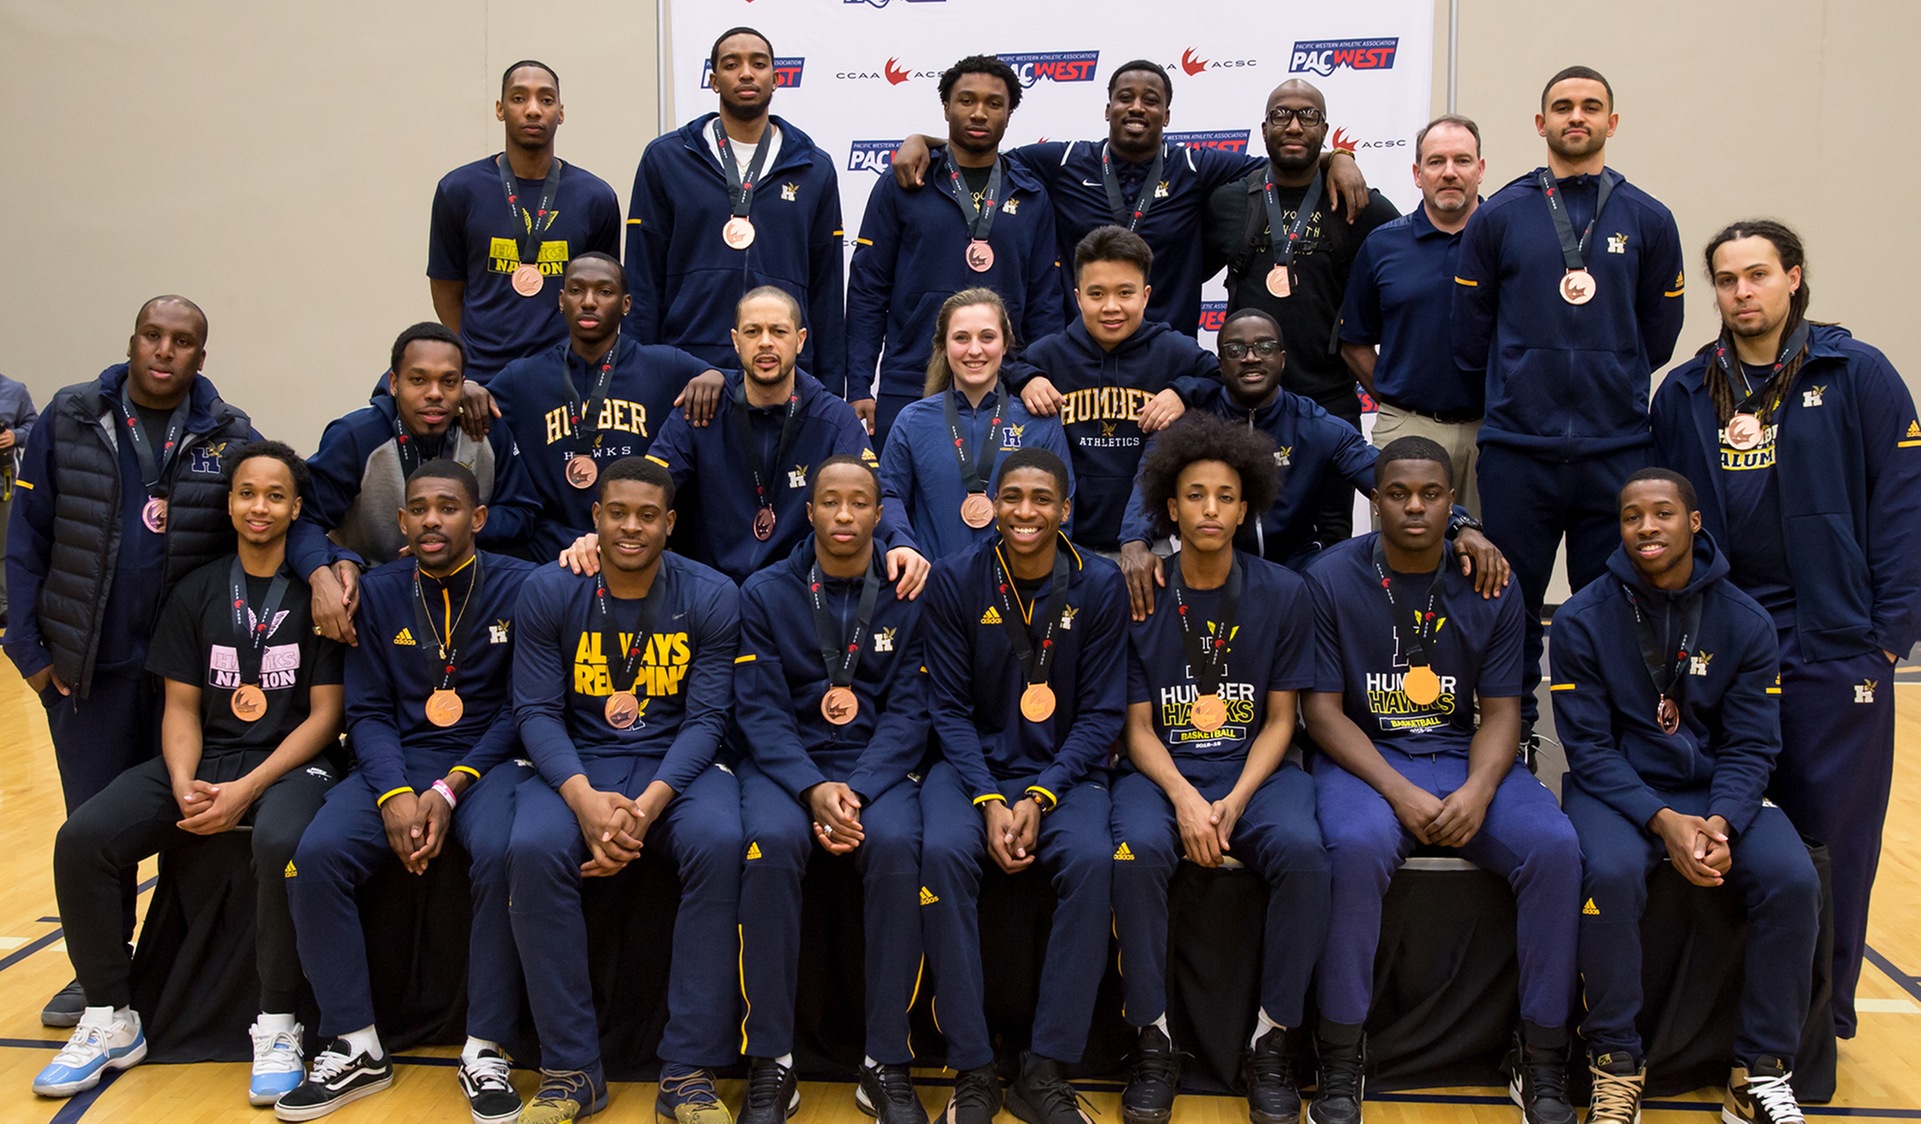 MEN'S BASKETBALL RALLIES FROM BEHIND TO CAPTURE CCAA BRONZE MEDAL